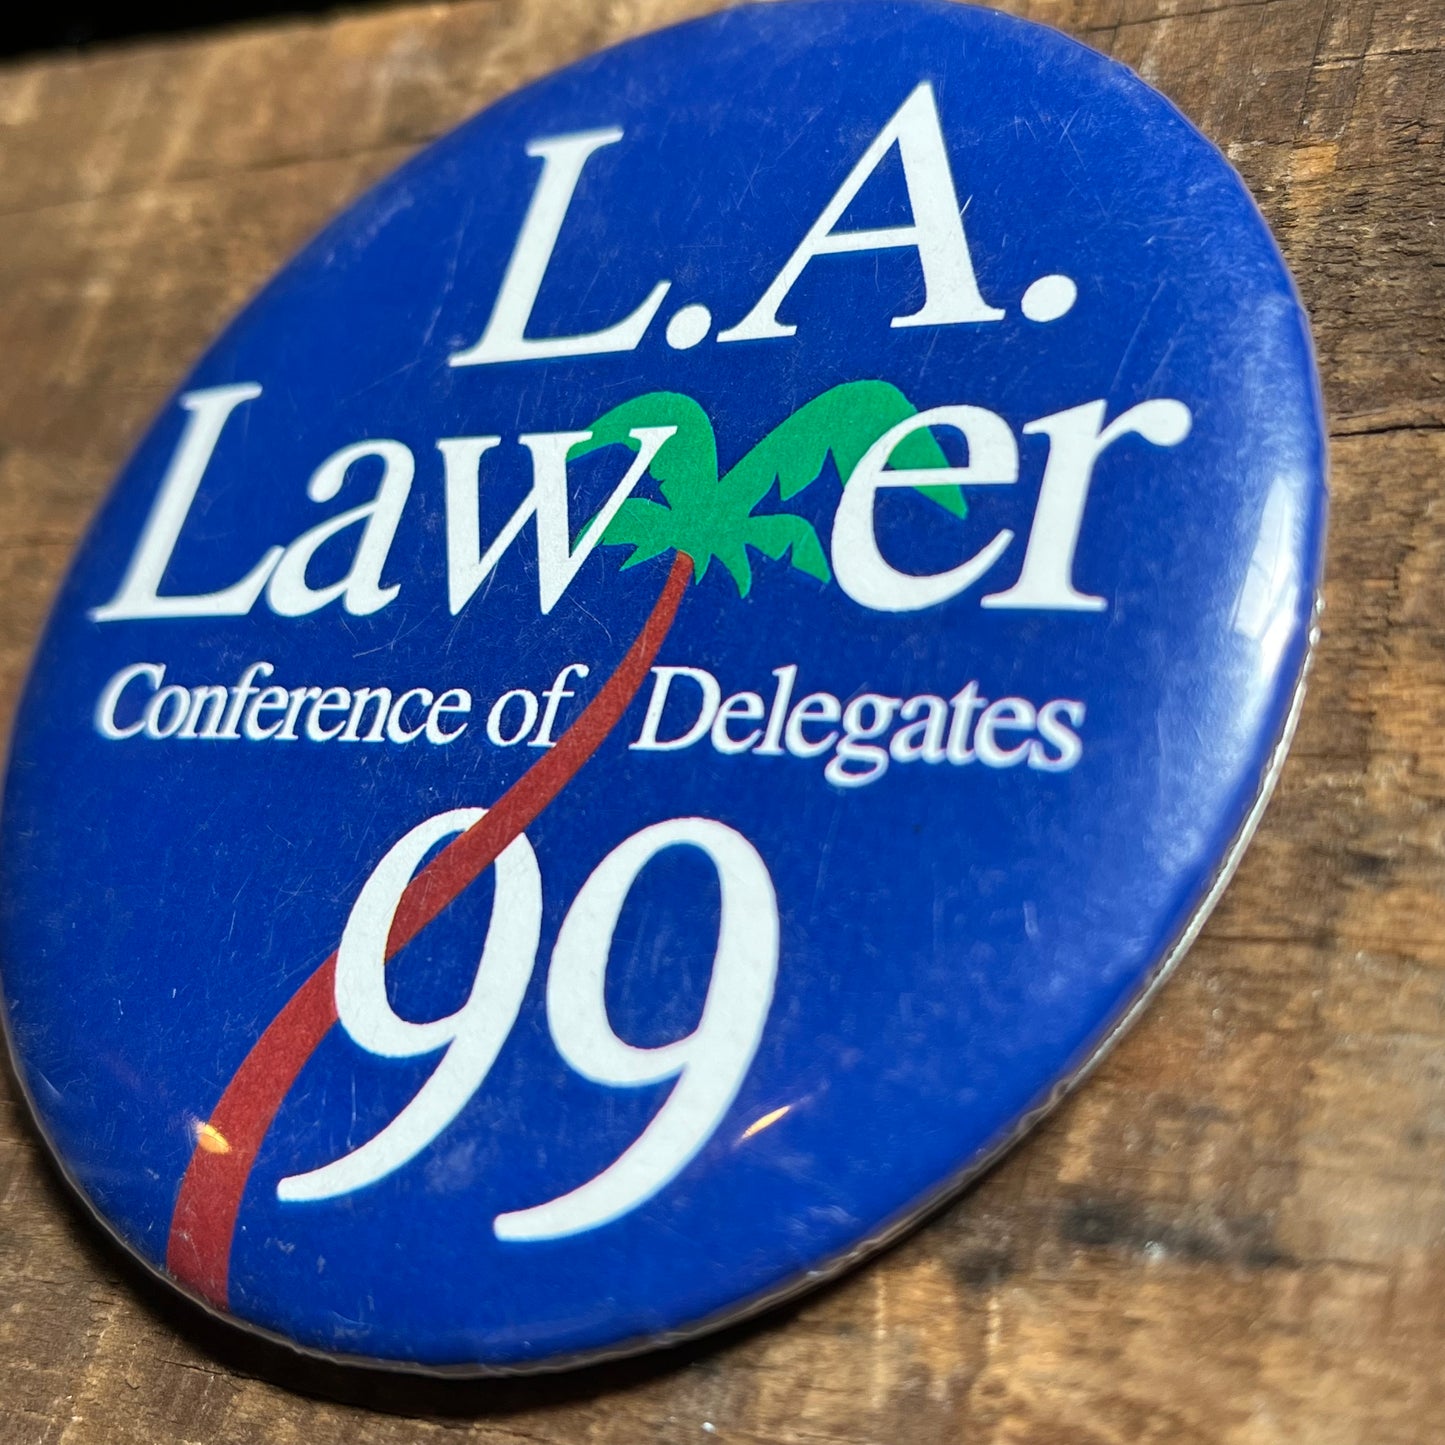 【USA vintage】缶バッジ　L.A. Lawer 99